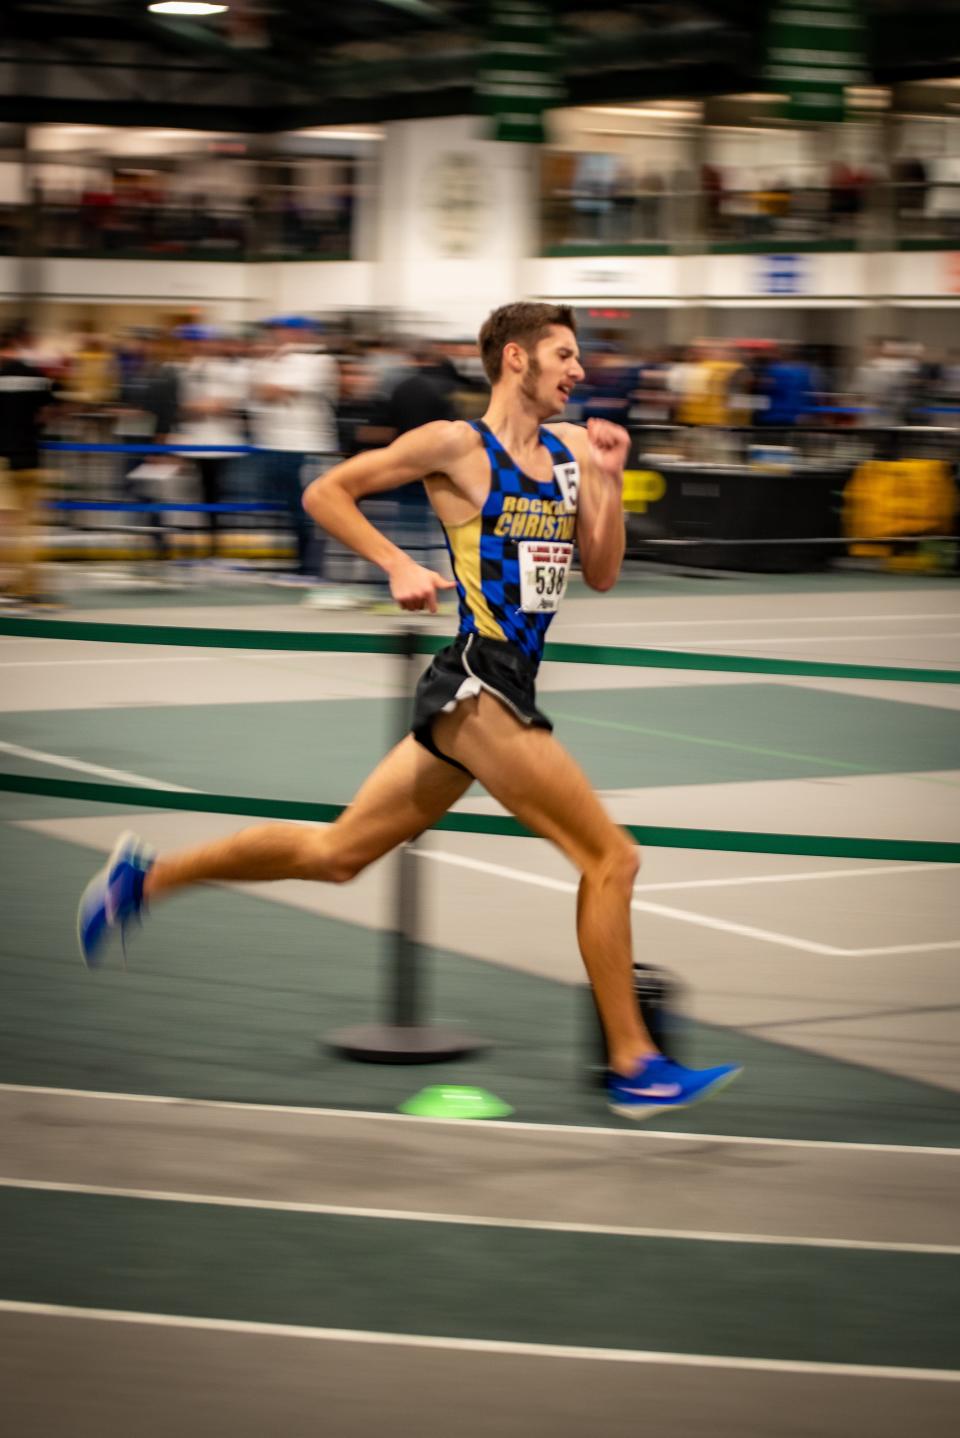 Rockord Christian senior Weston Forward, shown here taking a curve at fast speeds, earned three top-10 finishes at the Illinois Top Times Indoor State Meet in Bloomington on Friday, March 22, 2024.